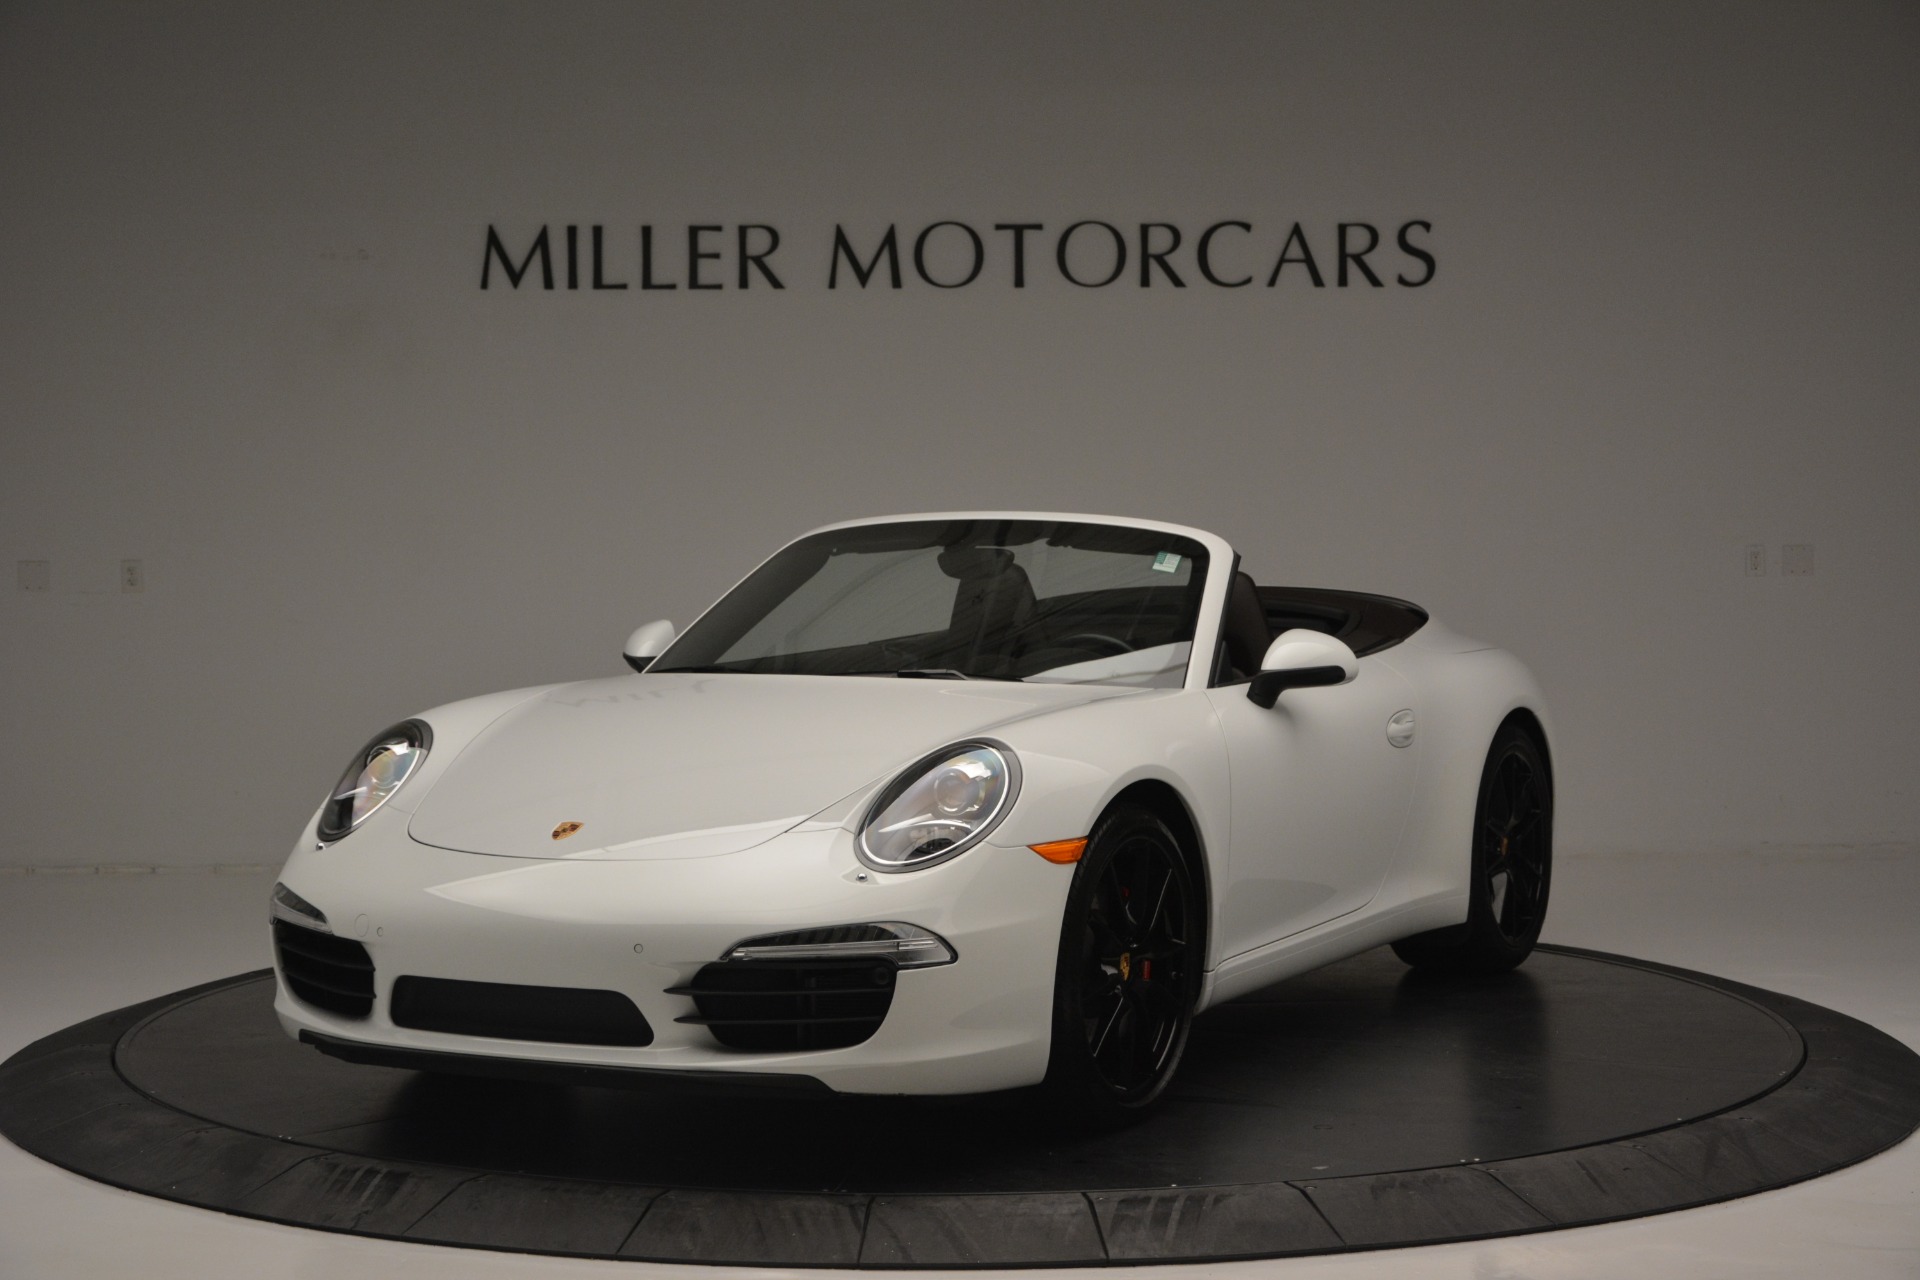 Used 2015 Porsche 911 Carrera S for sale Sold at McLaren Greenwich in Greenwich CT 06830 1